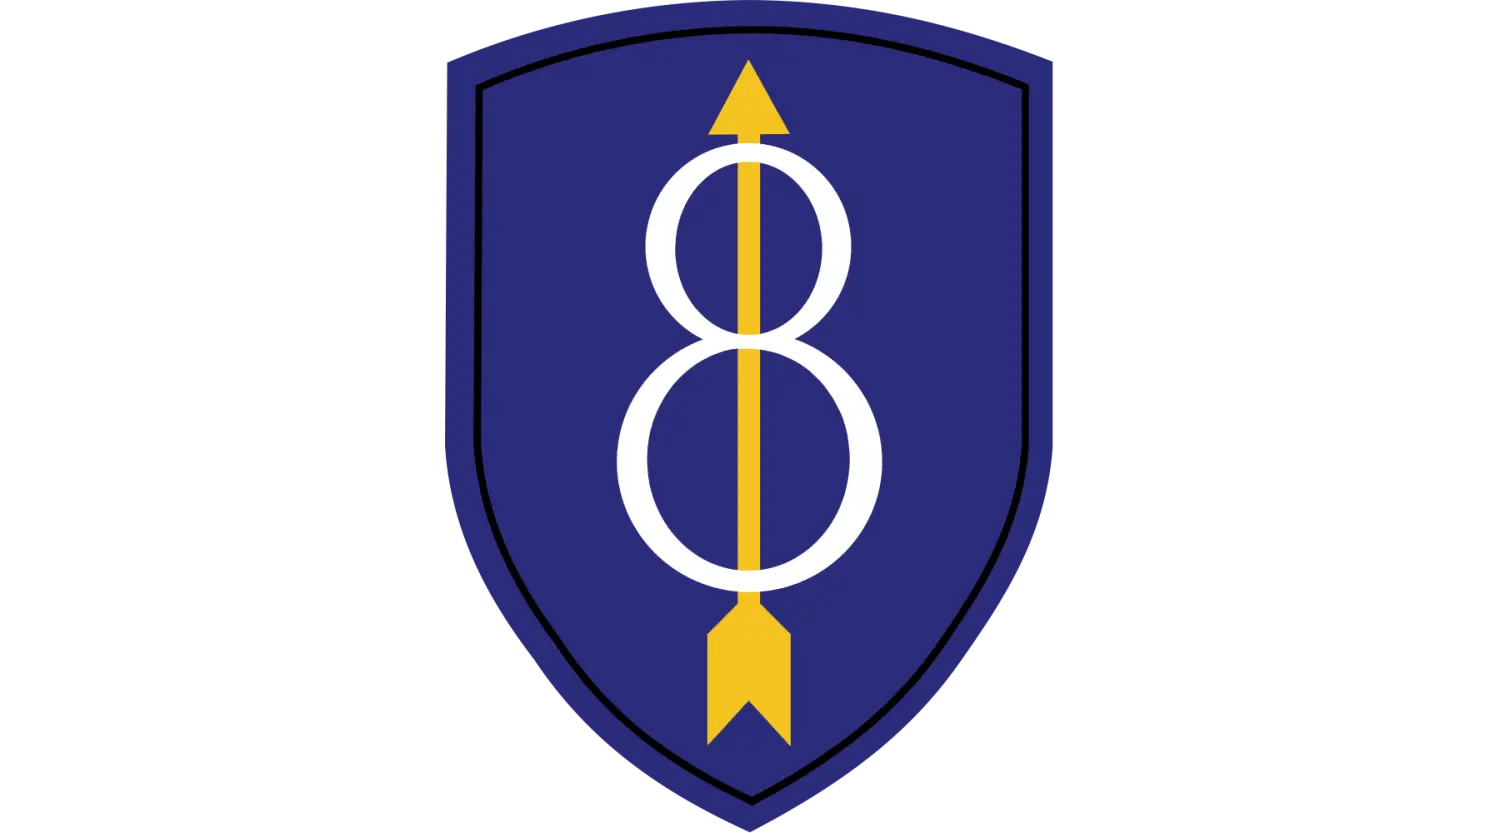 8th Infantry 'Pathfinder' Division (U.S. Army - Historical) Motto History - Tactically Acquired